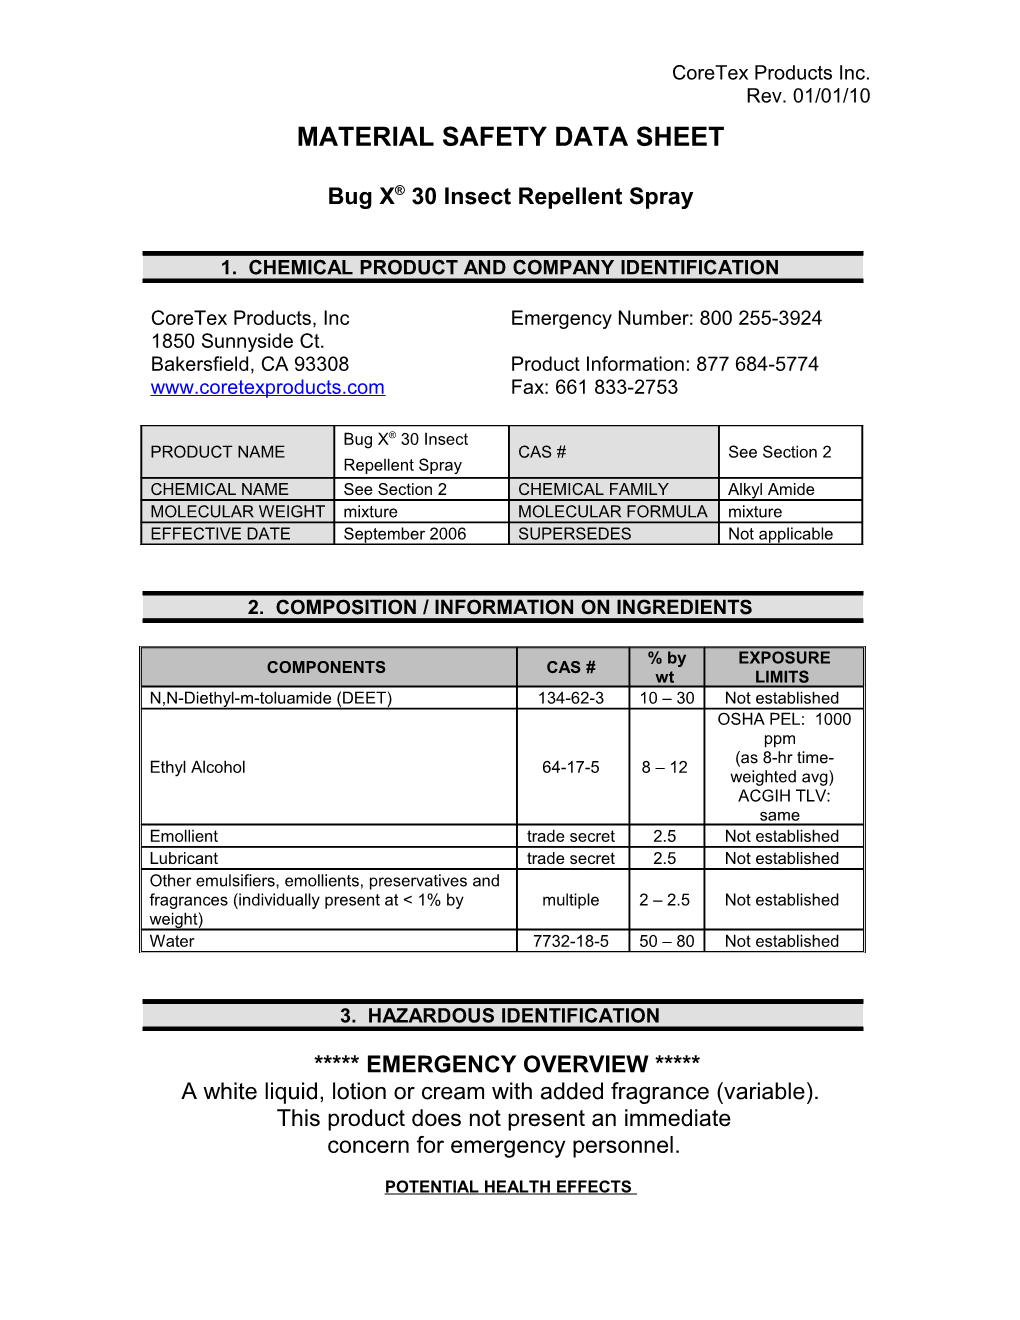 Material Safety Data Sheet s45